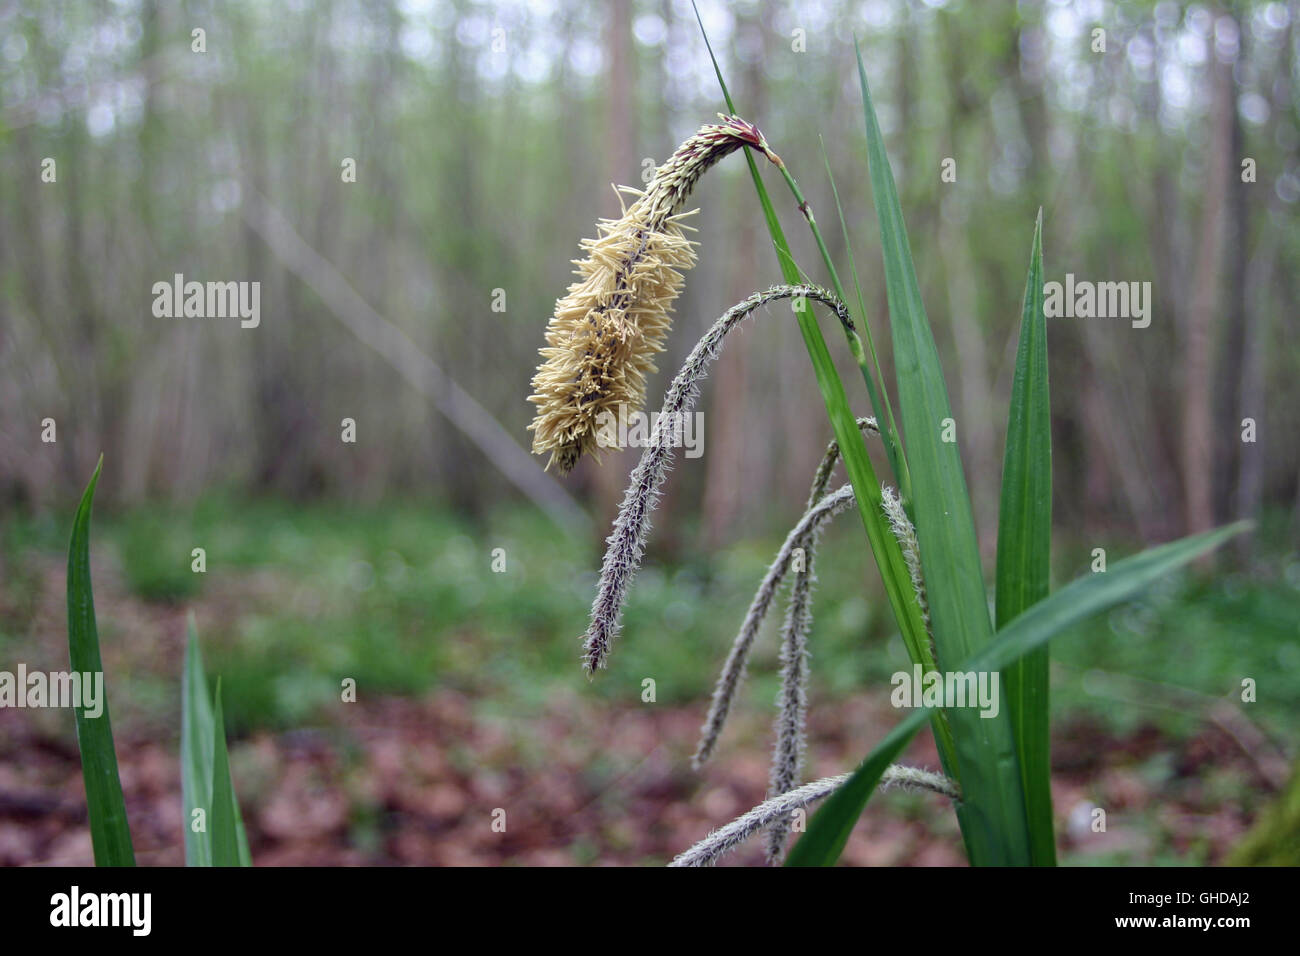 Sedge (Carex) with male and female flowers Stock Photo